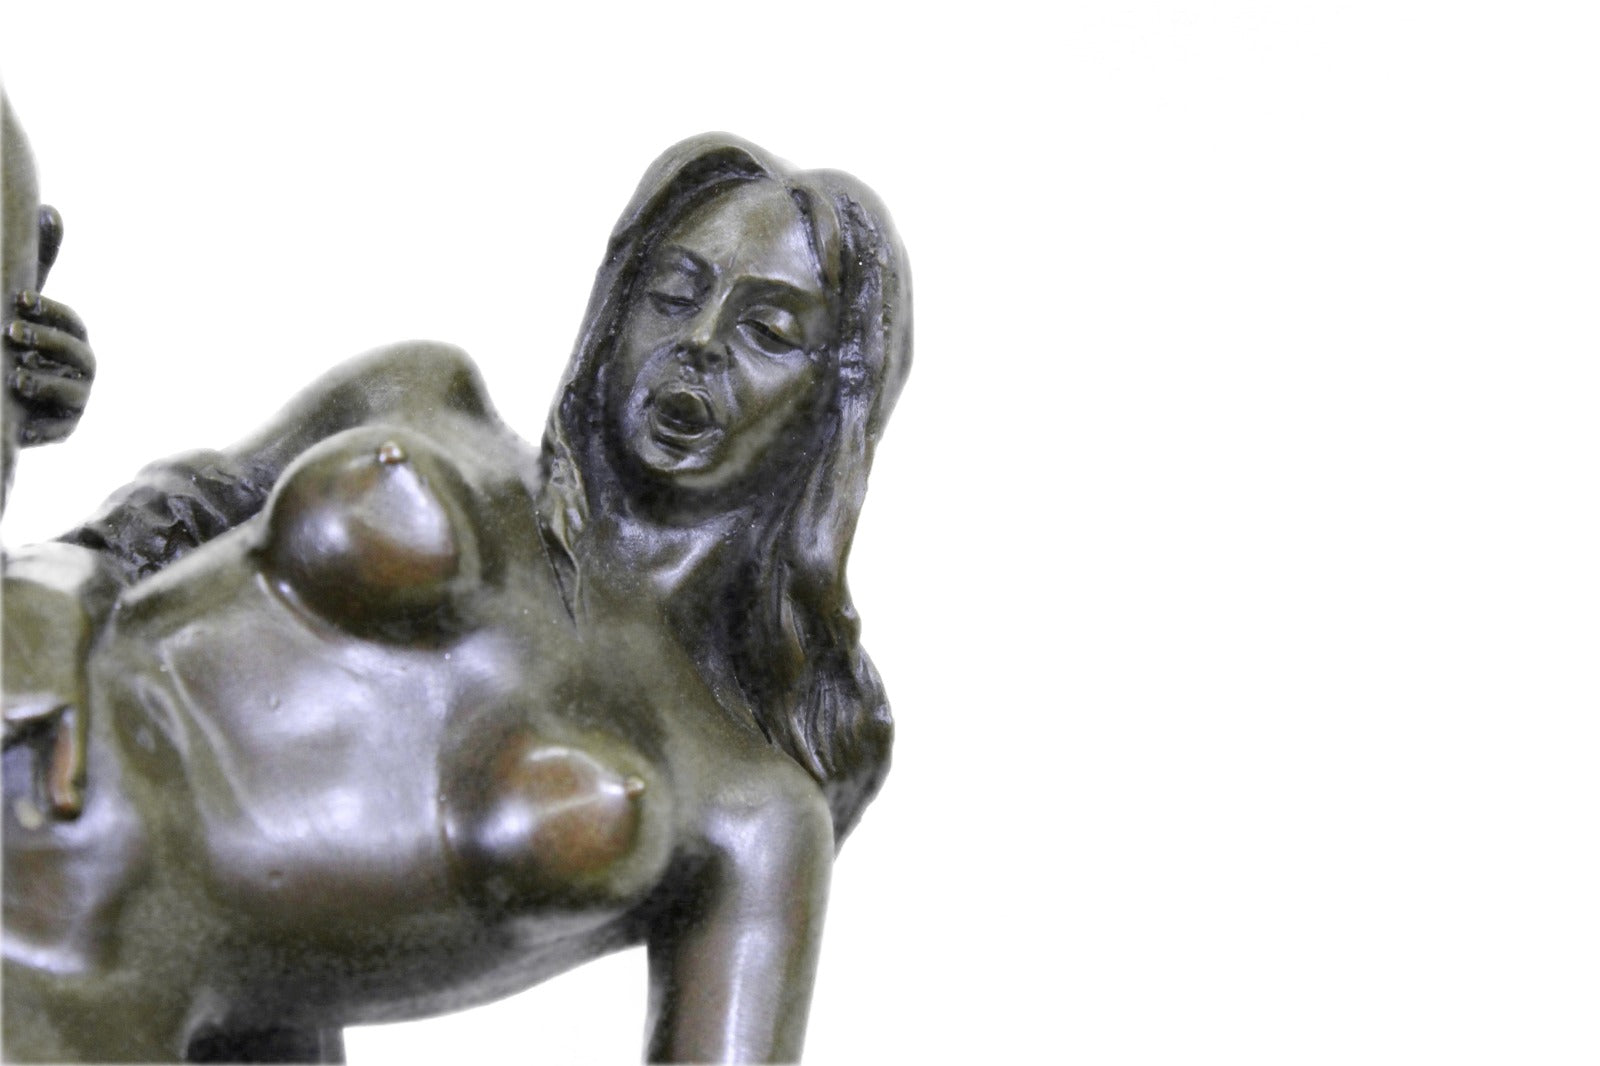 Two Lesbian Sexual Act Sex Strap On Dildo Erotic Bronze Sculpture Nude Statue